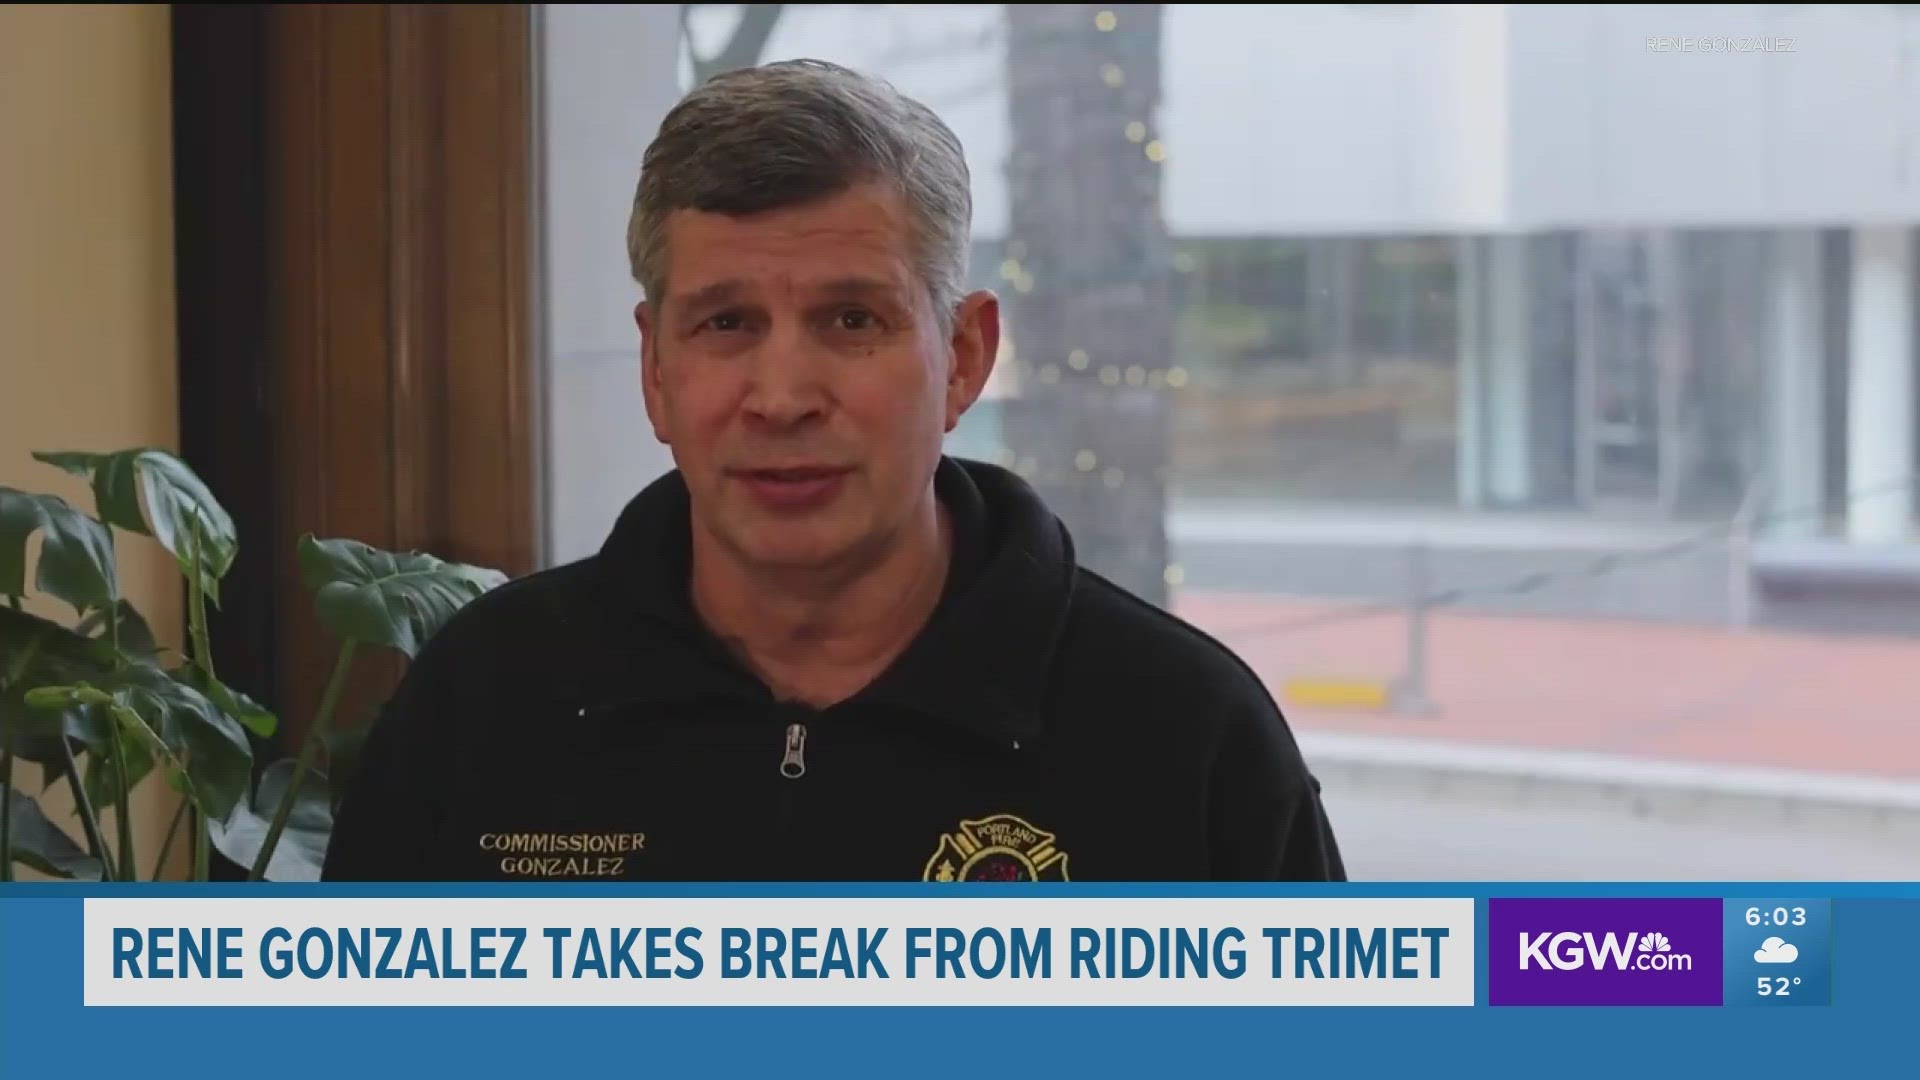 After a reported altercation with a passenger, Portland City Commissioner Rene Gonzalez said he will no longer be riding TriMet.